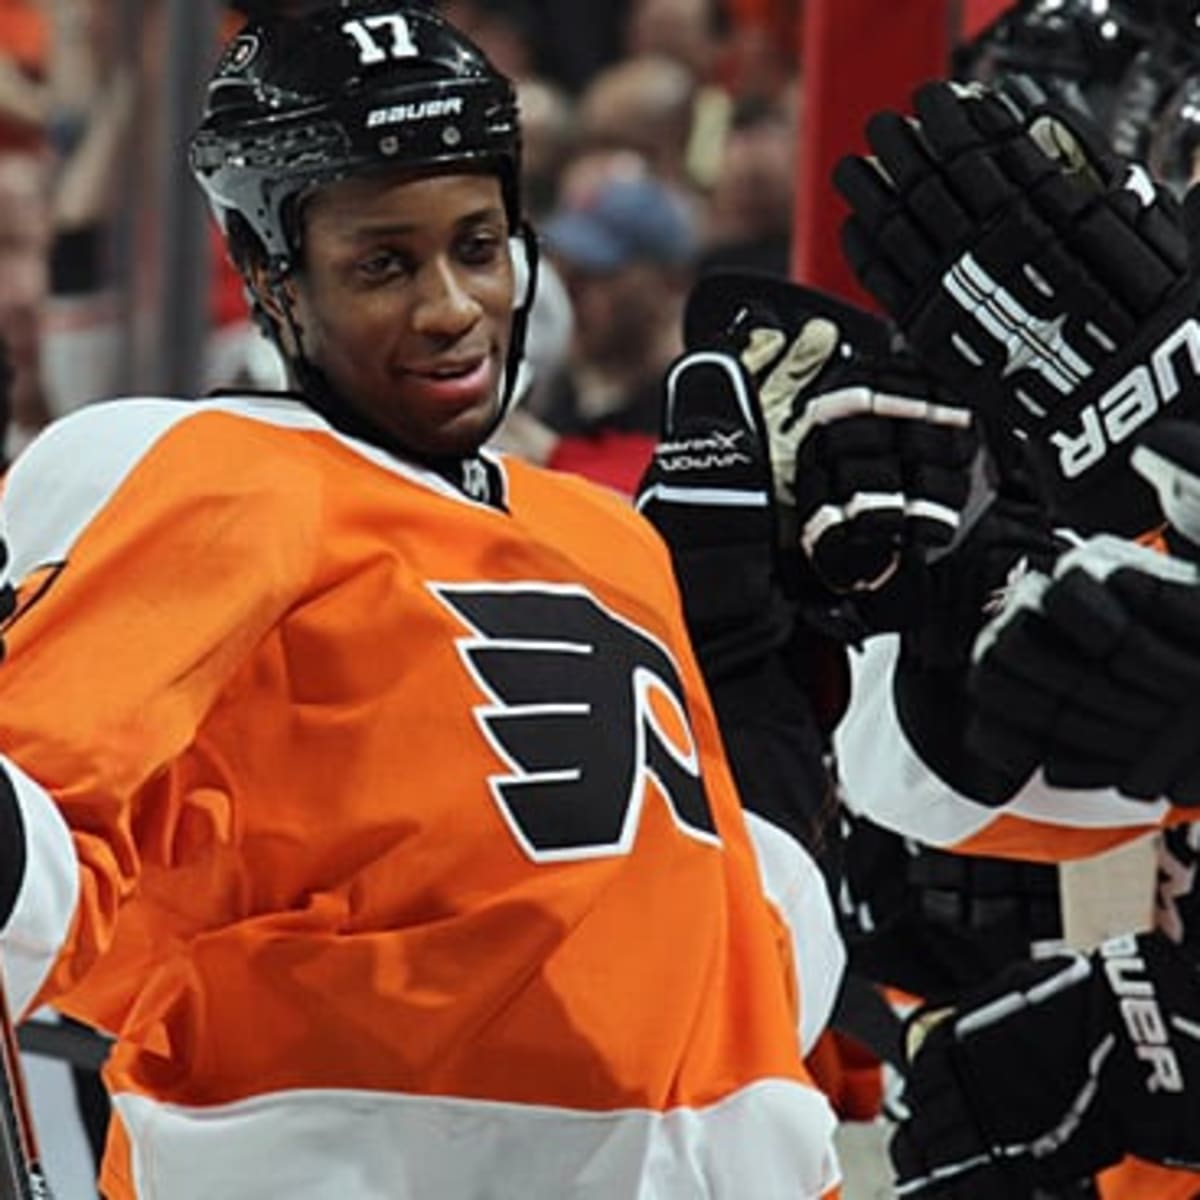 How Wayne Simmonds affected the Flyers